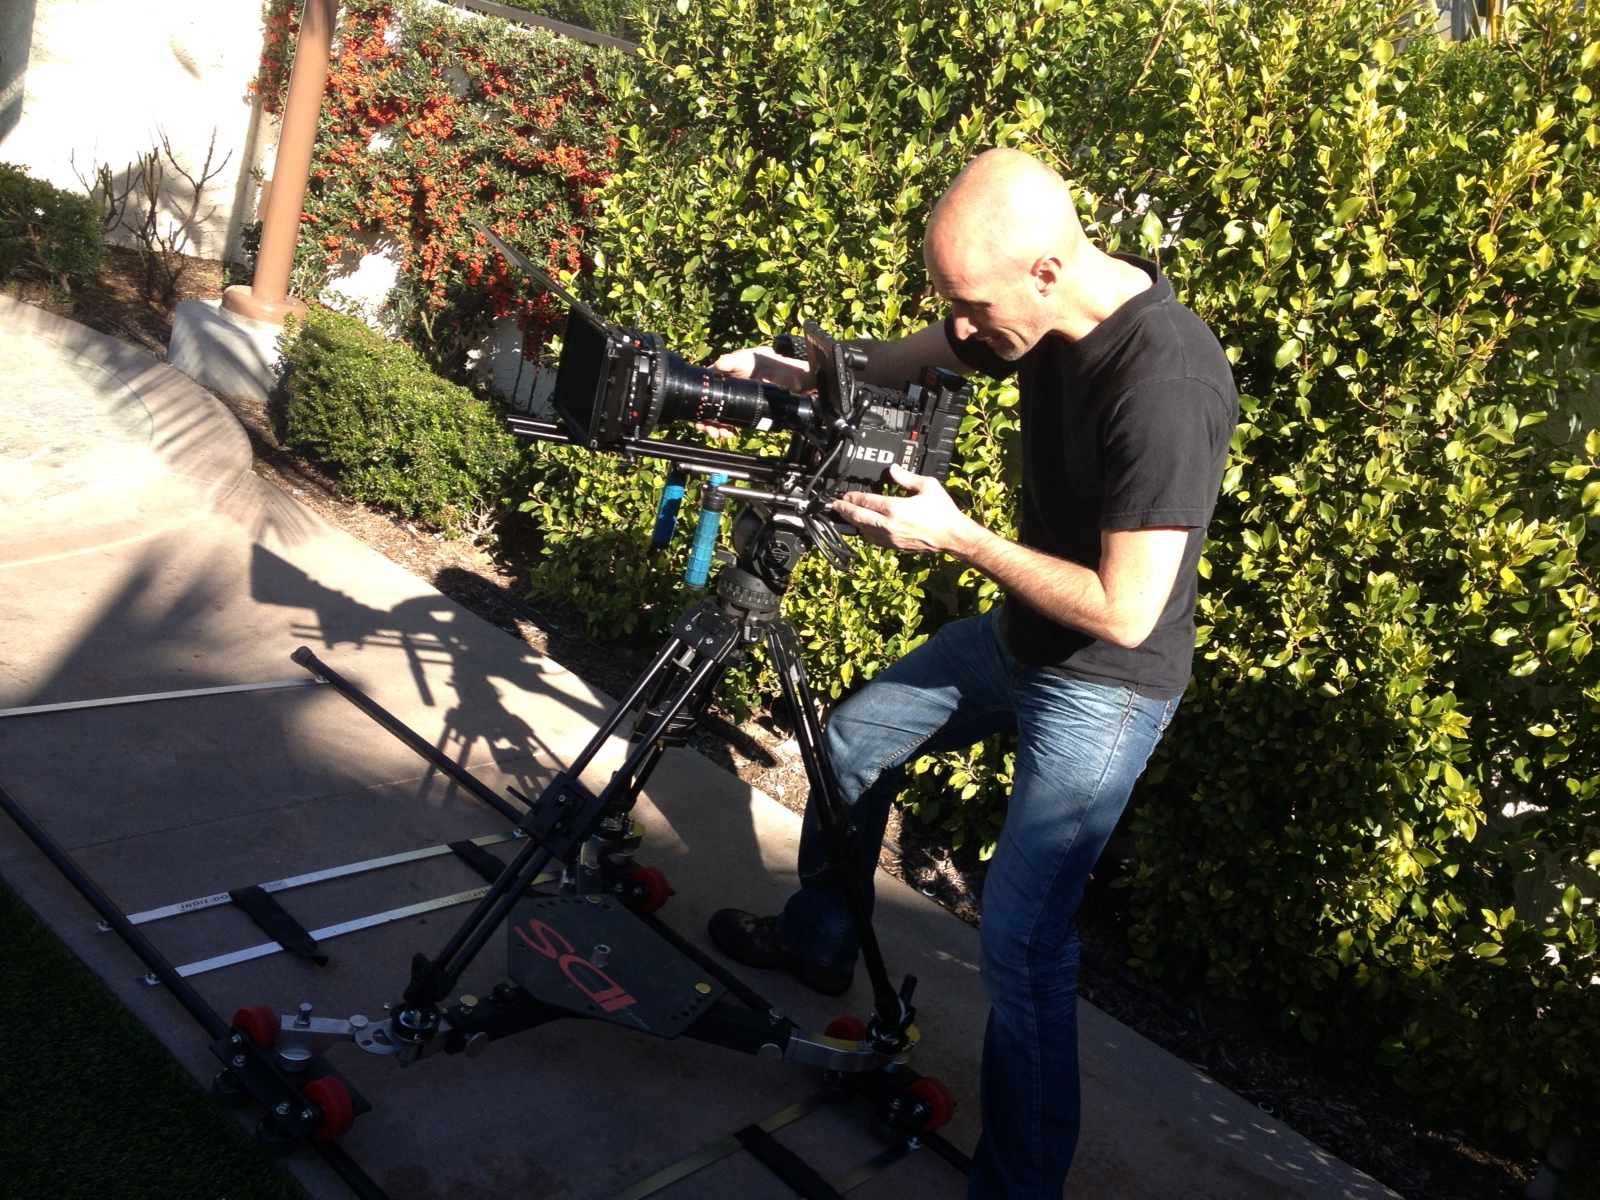 Working with Orange County Films on Newport Beach TV